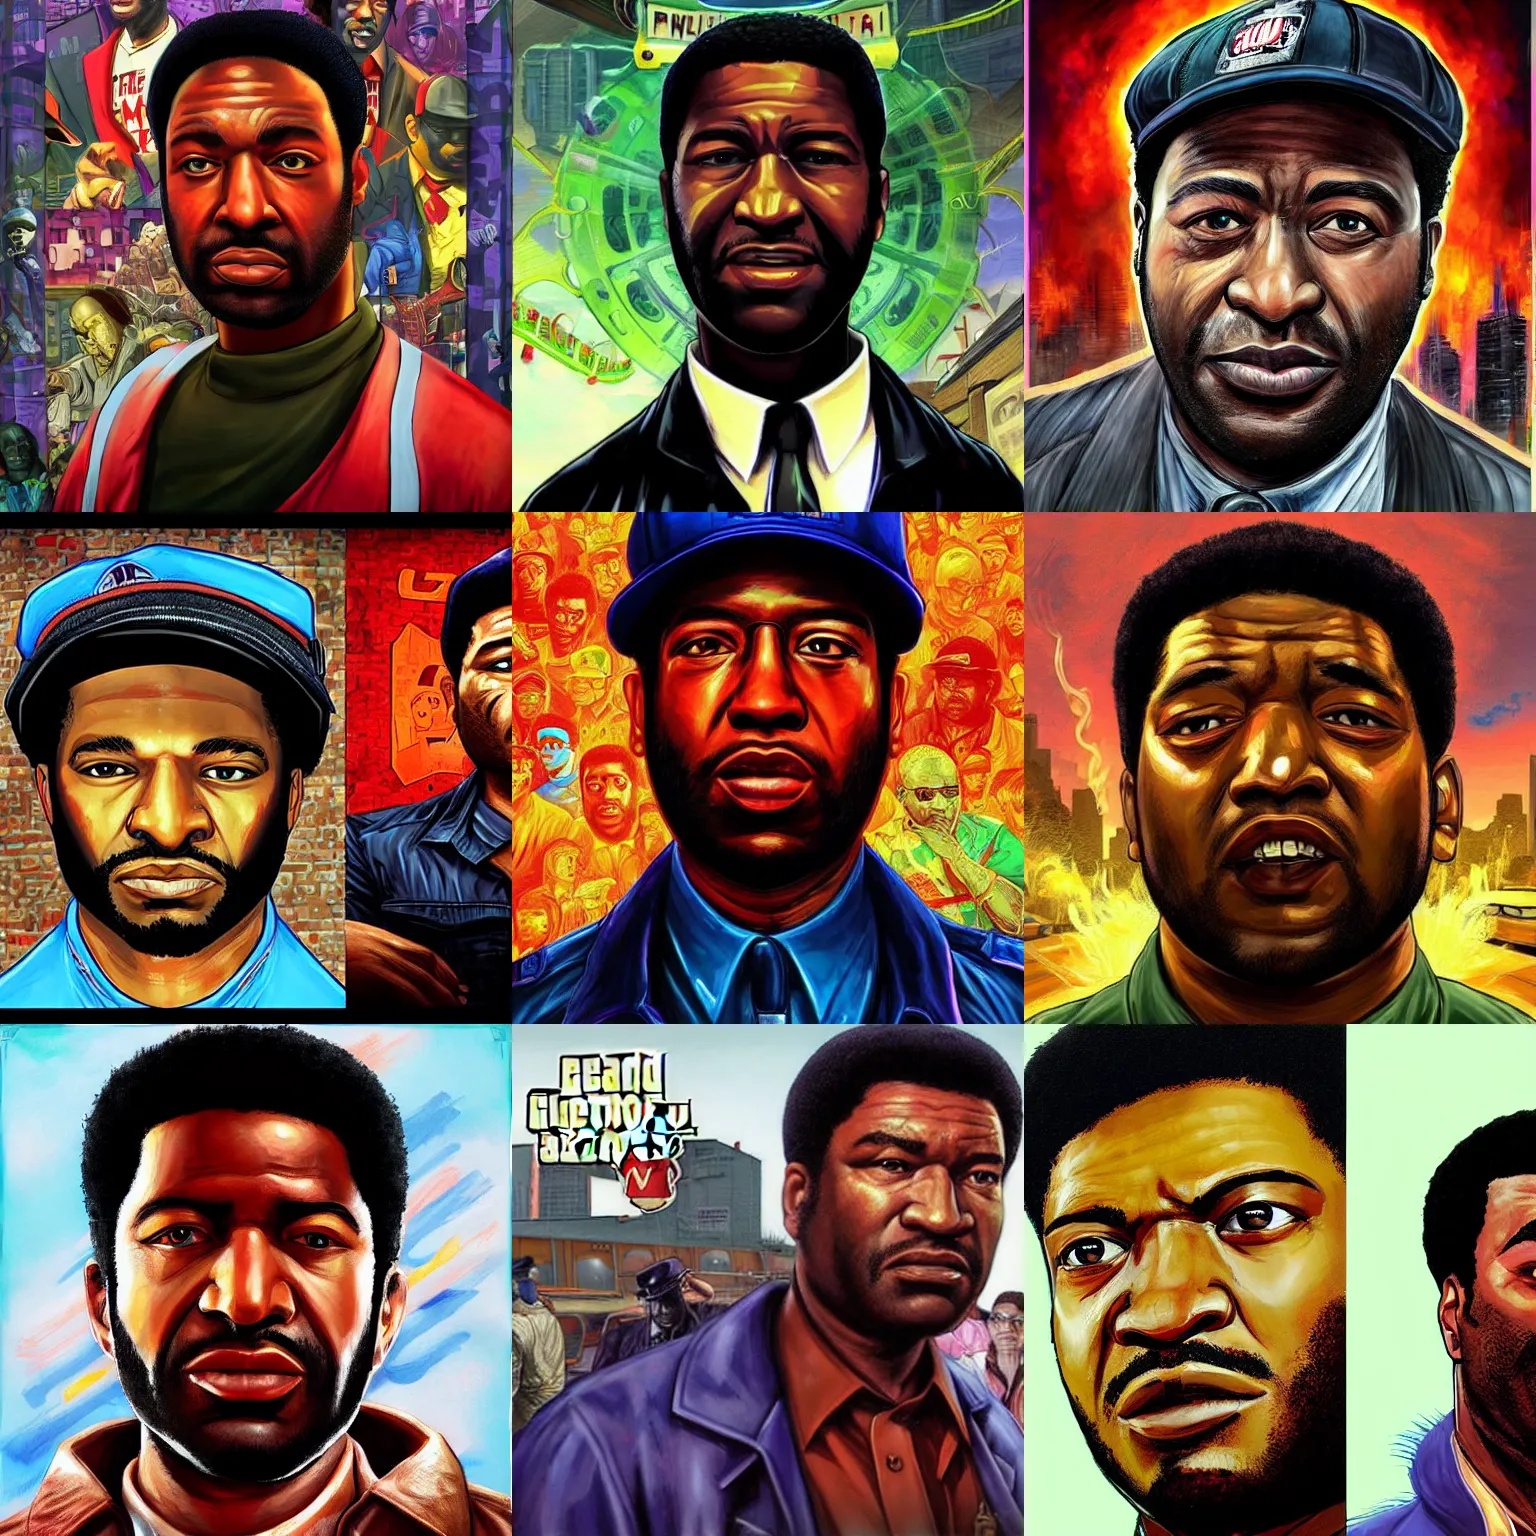 Prompt: fred hampton as a character in the game GTA VI, with a background based on the game League of Legends, detailed face, photorealistic pAINTING BY android jones, alex grey, chris dyer, and aaron brooks